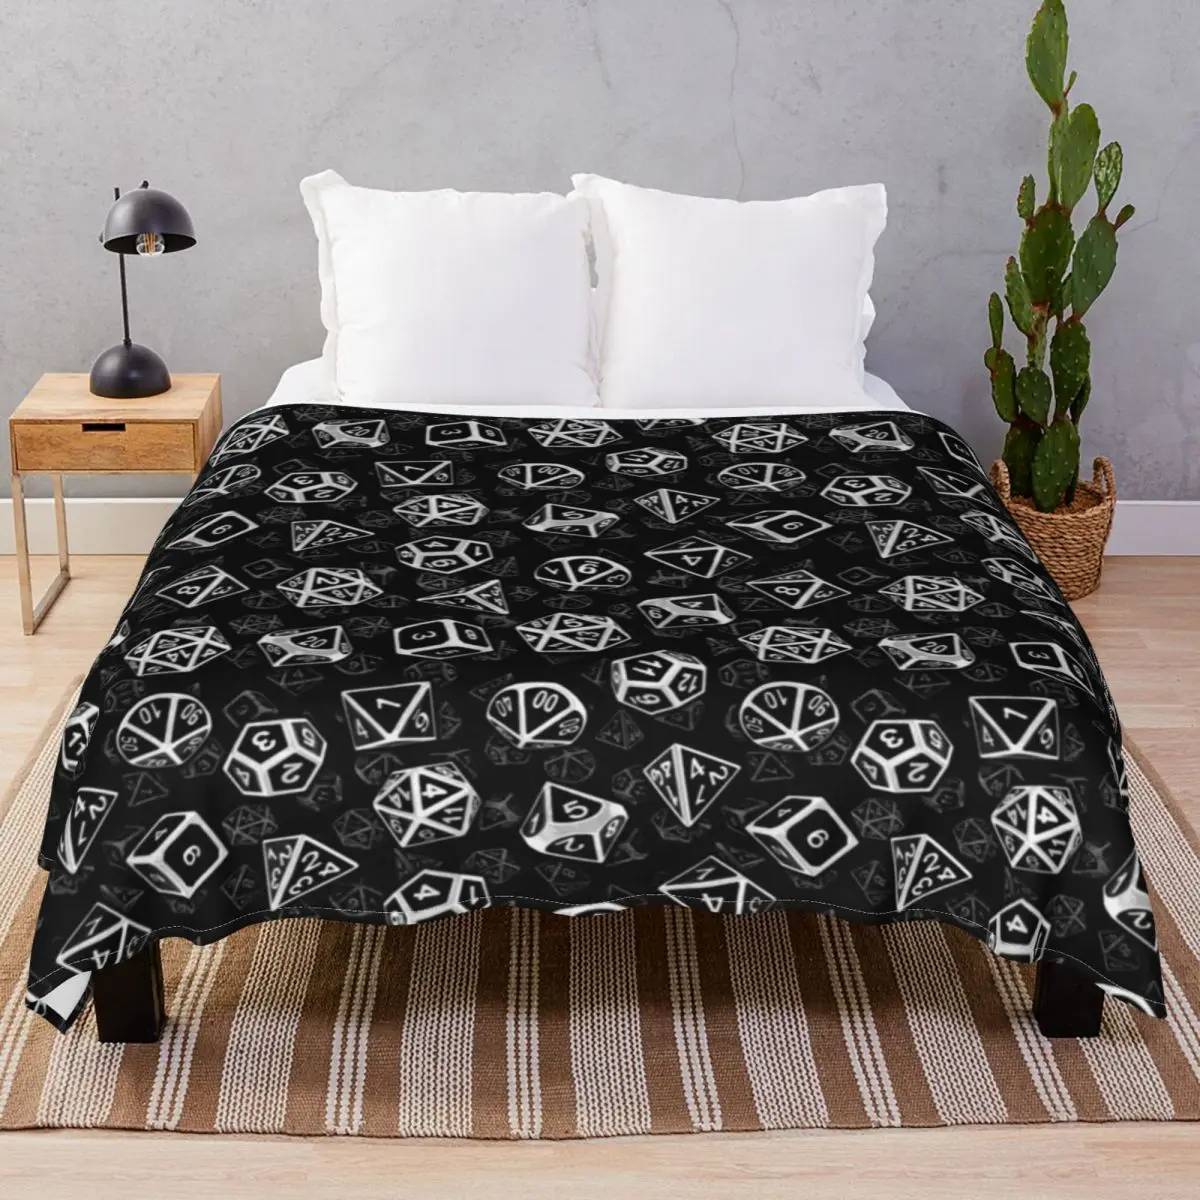 D20 Dice Set Pattern White Blankets Flannel All Season Fluffy Unisex Throw Blanket for Bedding Sofa Camp Office